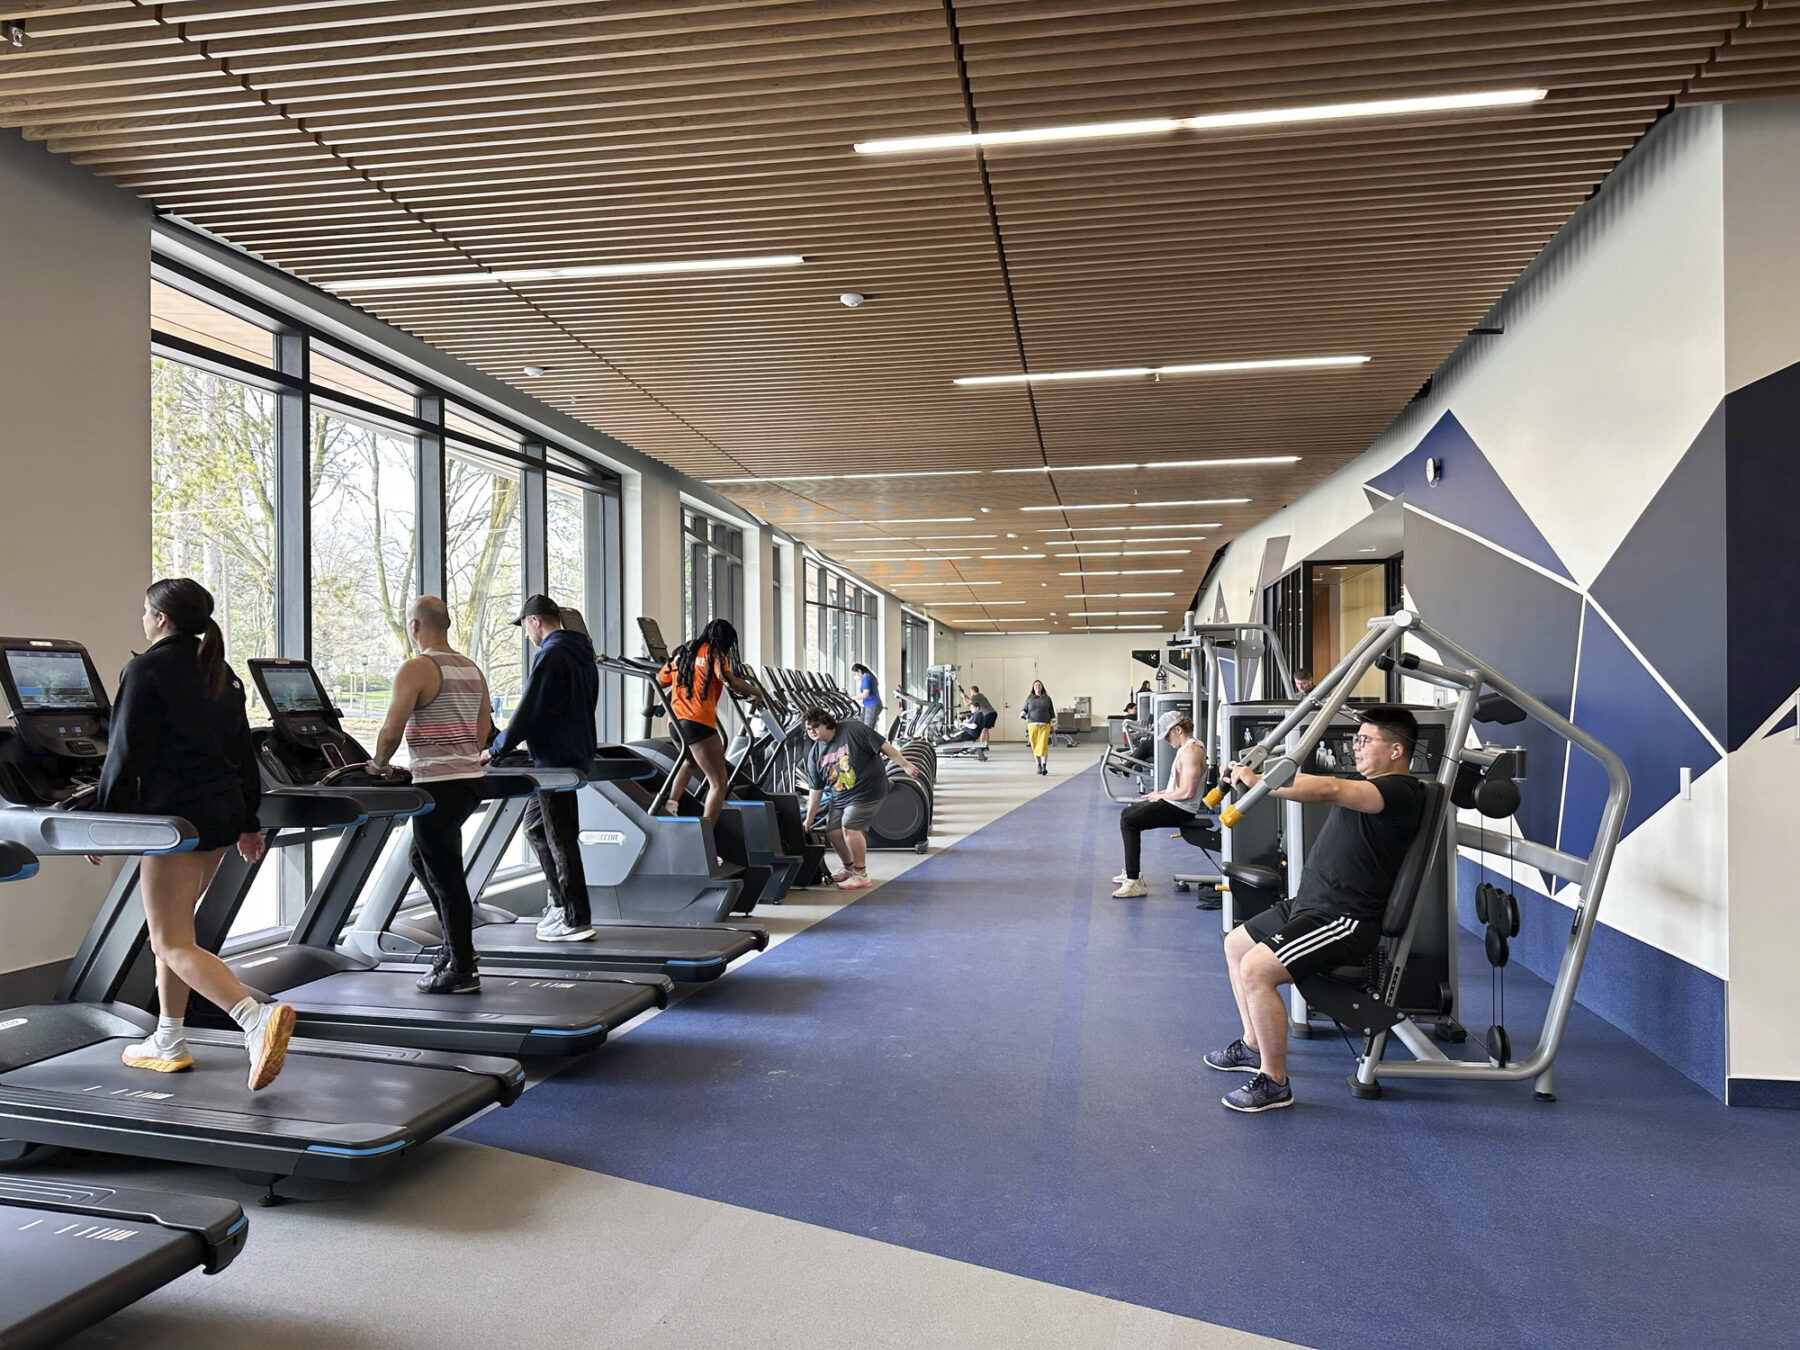 brightly lit room with students exercising on treadmills, weight machines, and other workout equipment